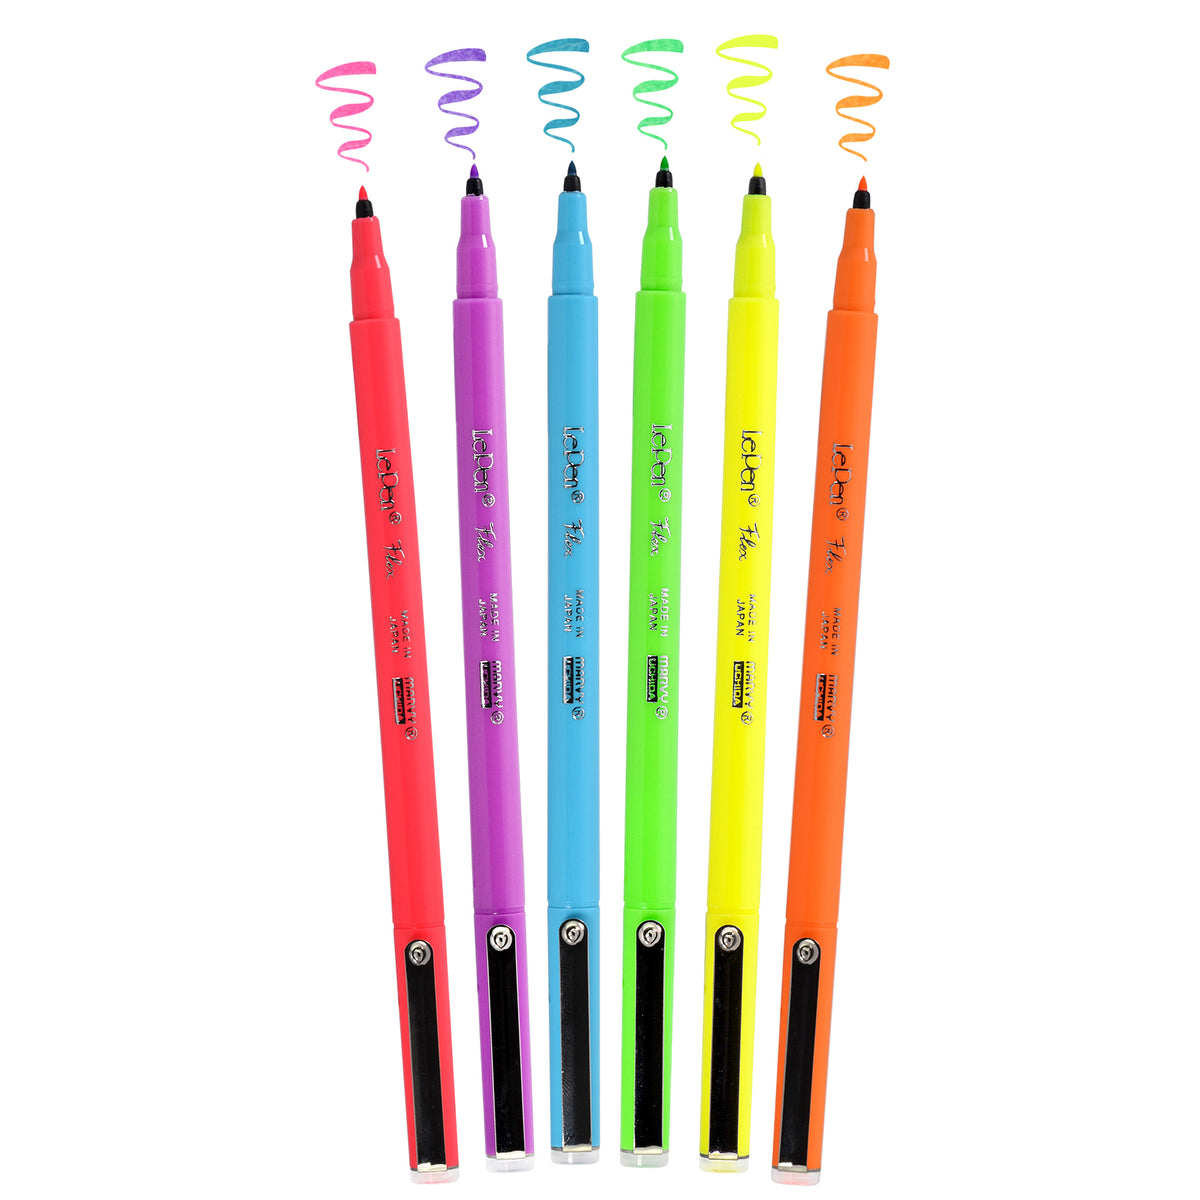 LePen Micro-Fine Point Pen, Neon, 10 Colors - UCH430010F